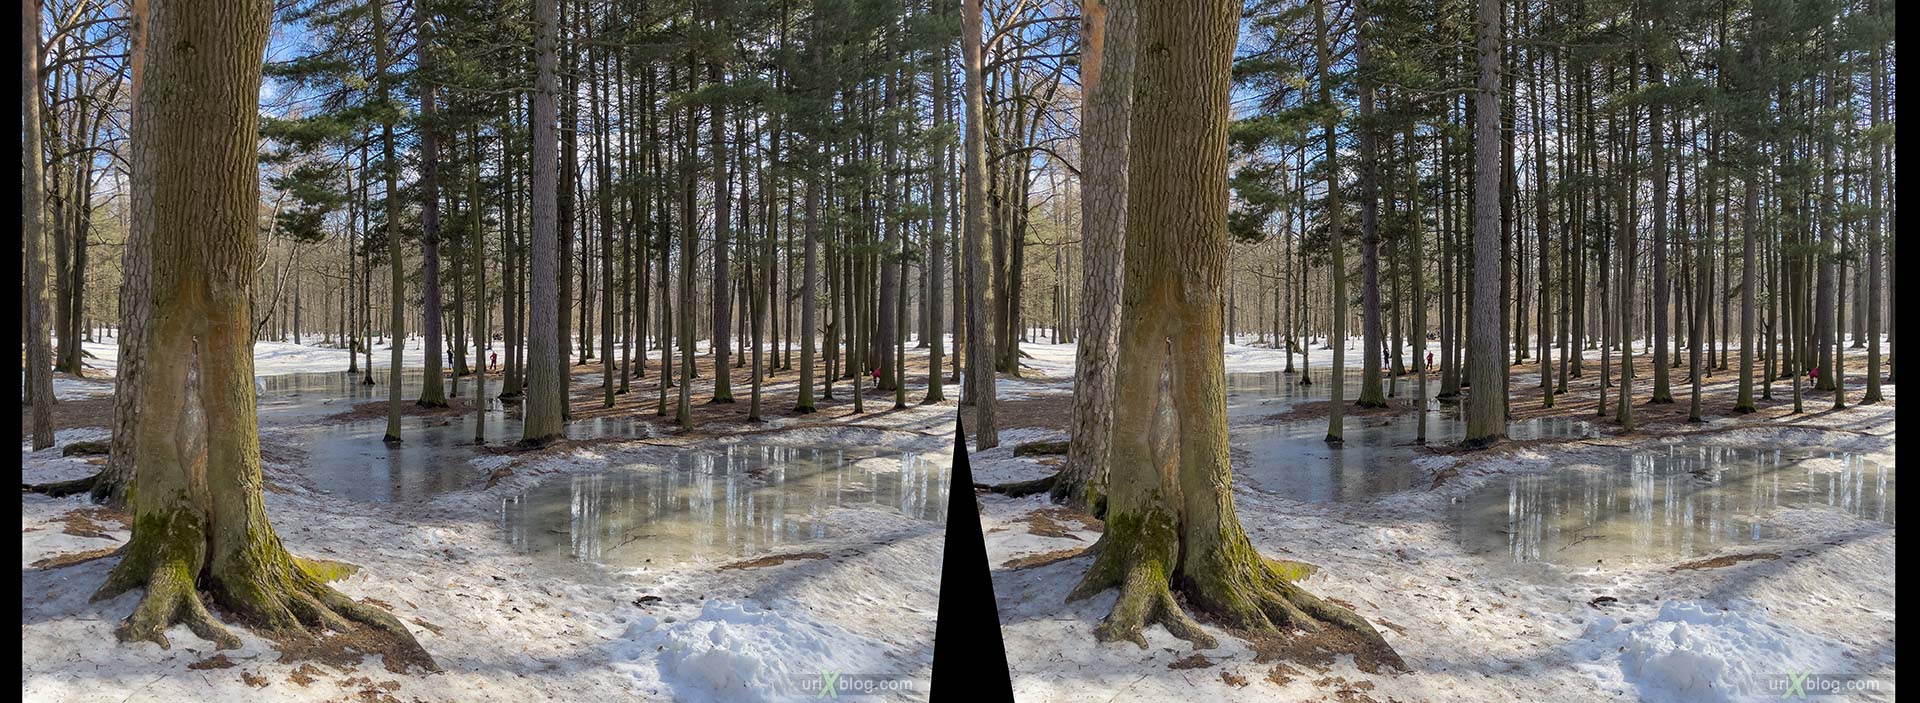 Timiryazevsky forest, park, forest, trees, snow, puddles, spring, winter, april, Moscow, Russia, 3D, stereo pair, cross-eyed, crossview, cross view stereo pair, stereoscopic